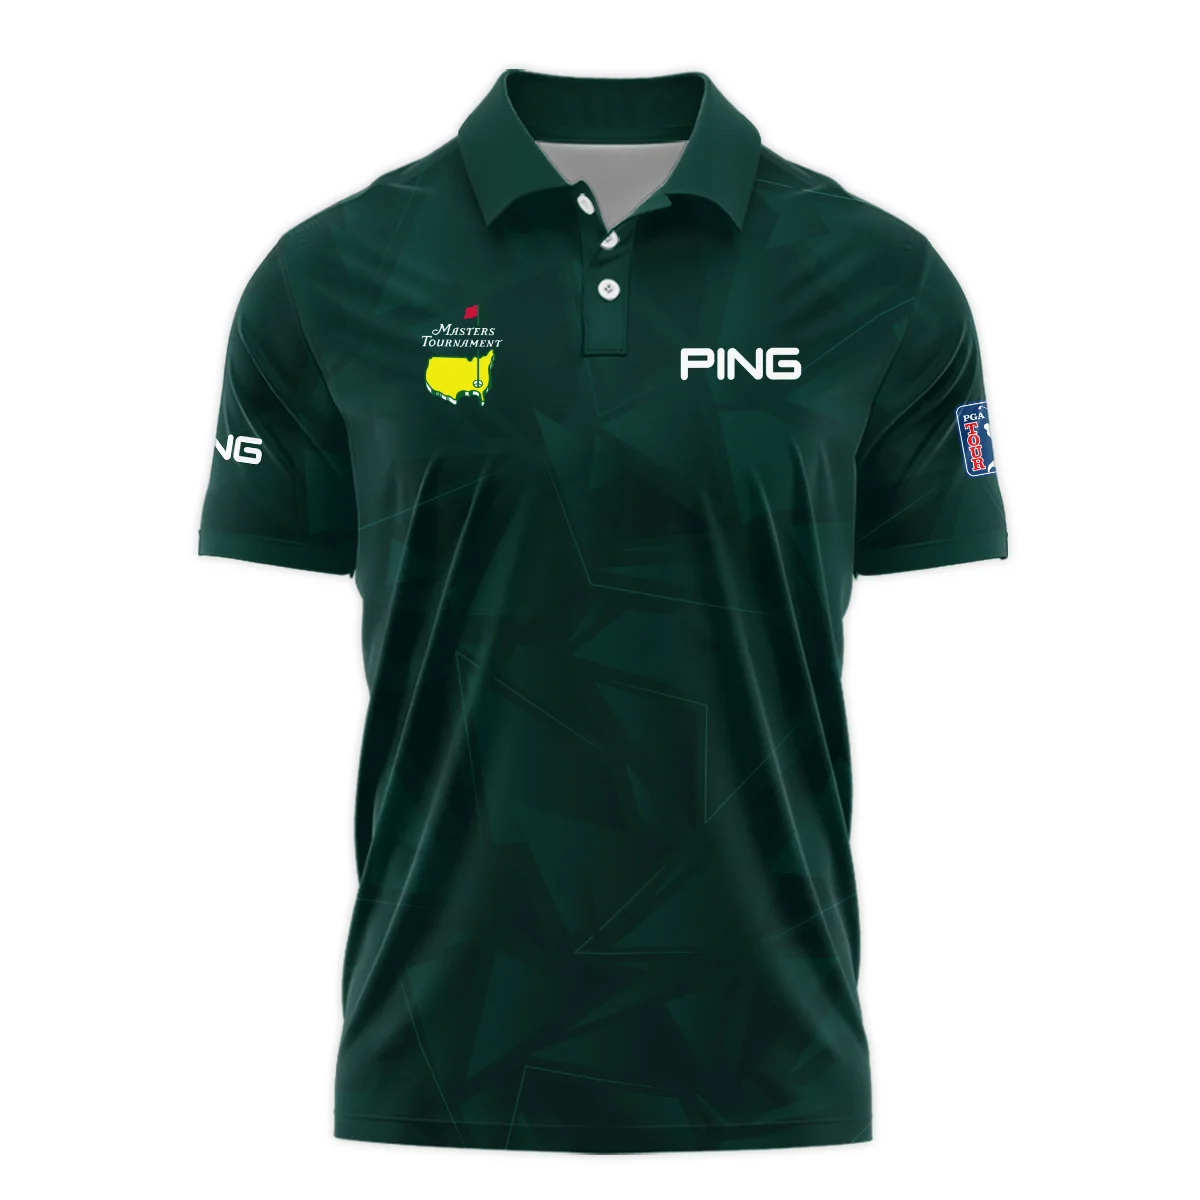 Dark Green Abstract Sport Masters Tournament Ping Vneck Polo Shirt Style Classic Polo Shirt For Men